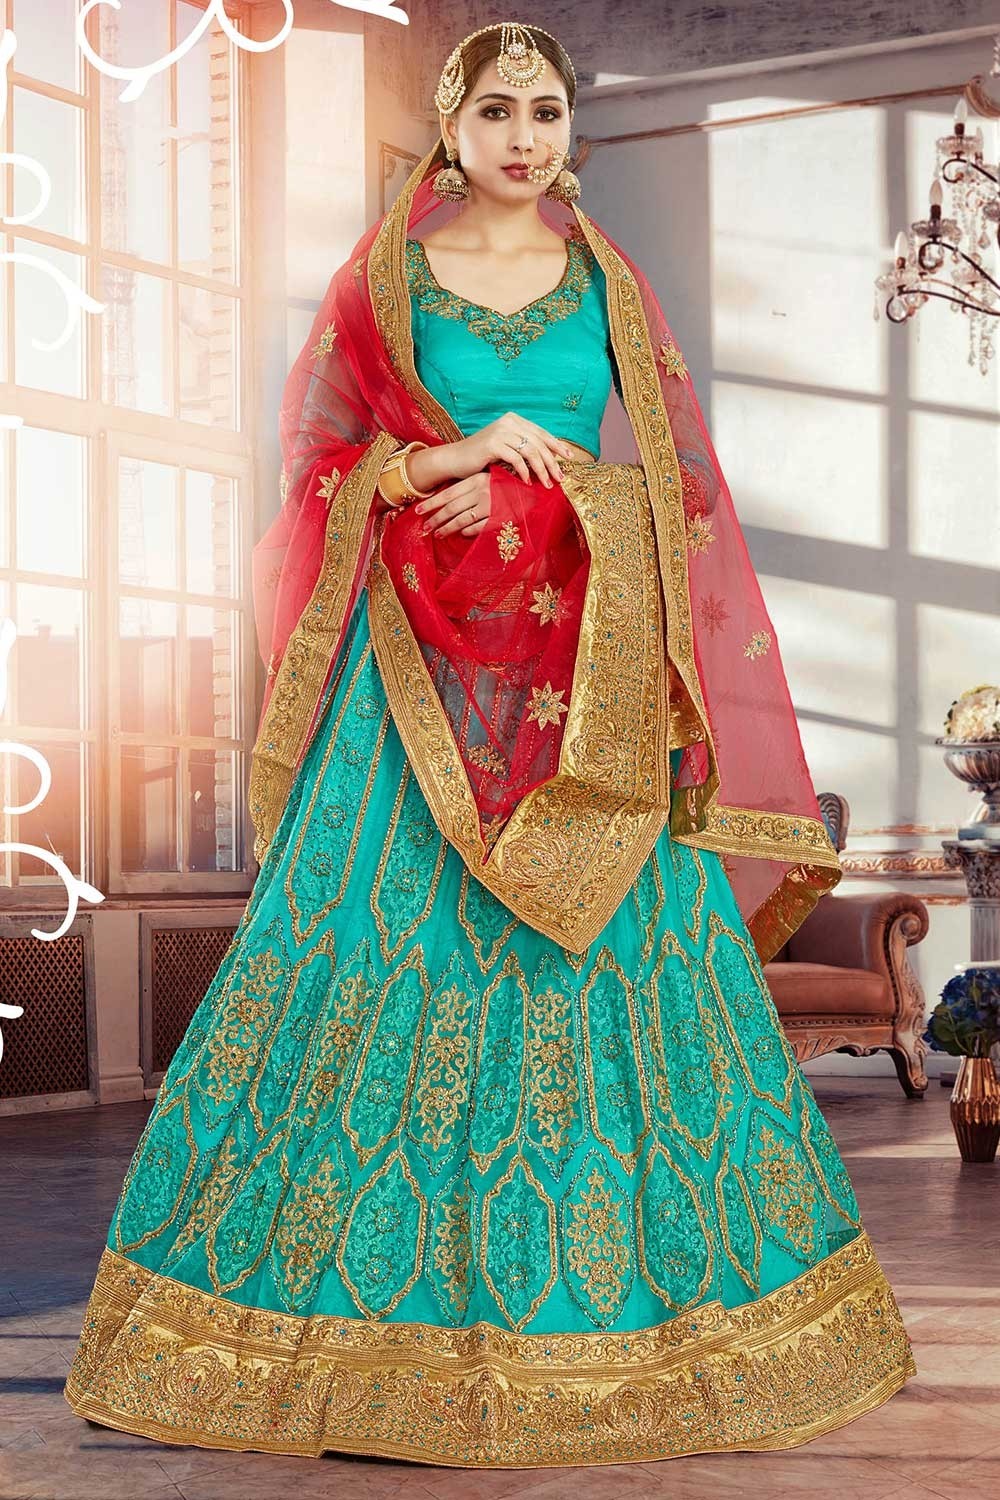 Photo of Bride twirling in red and green light lehenga